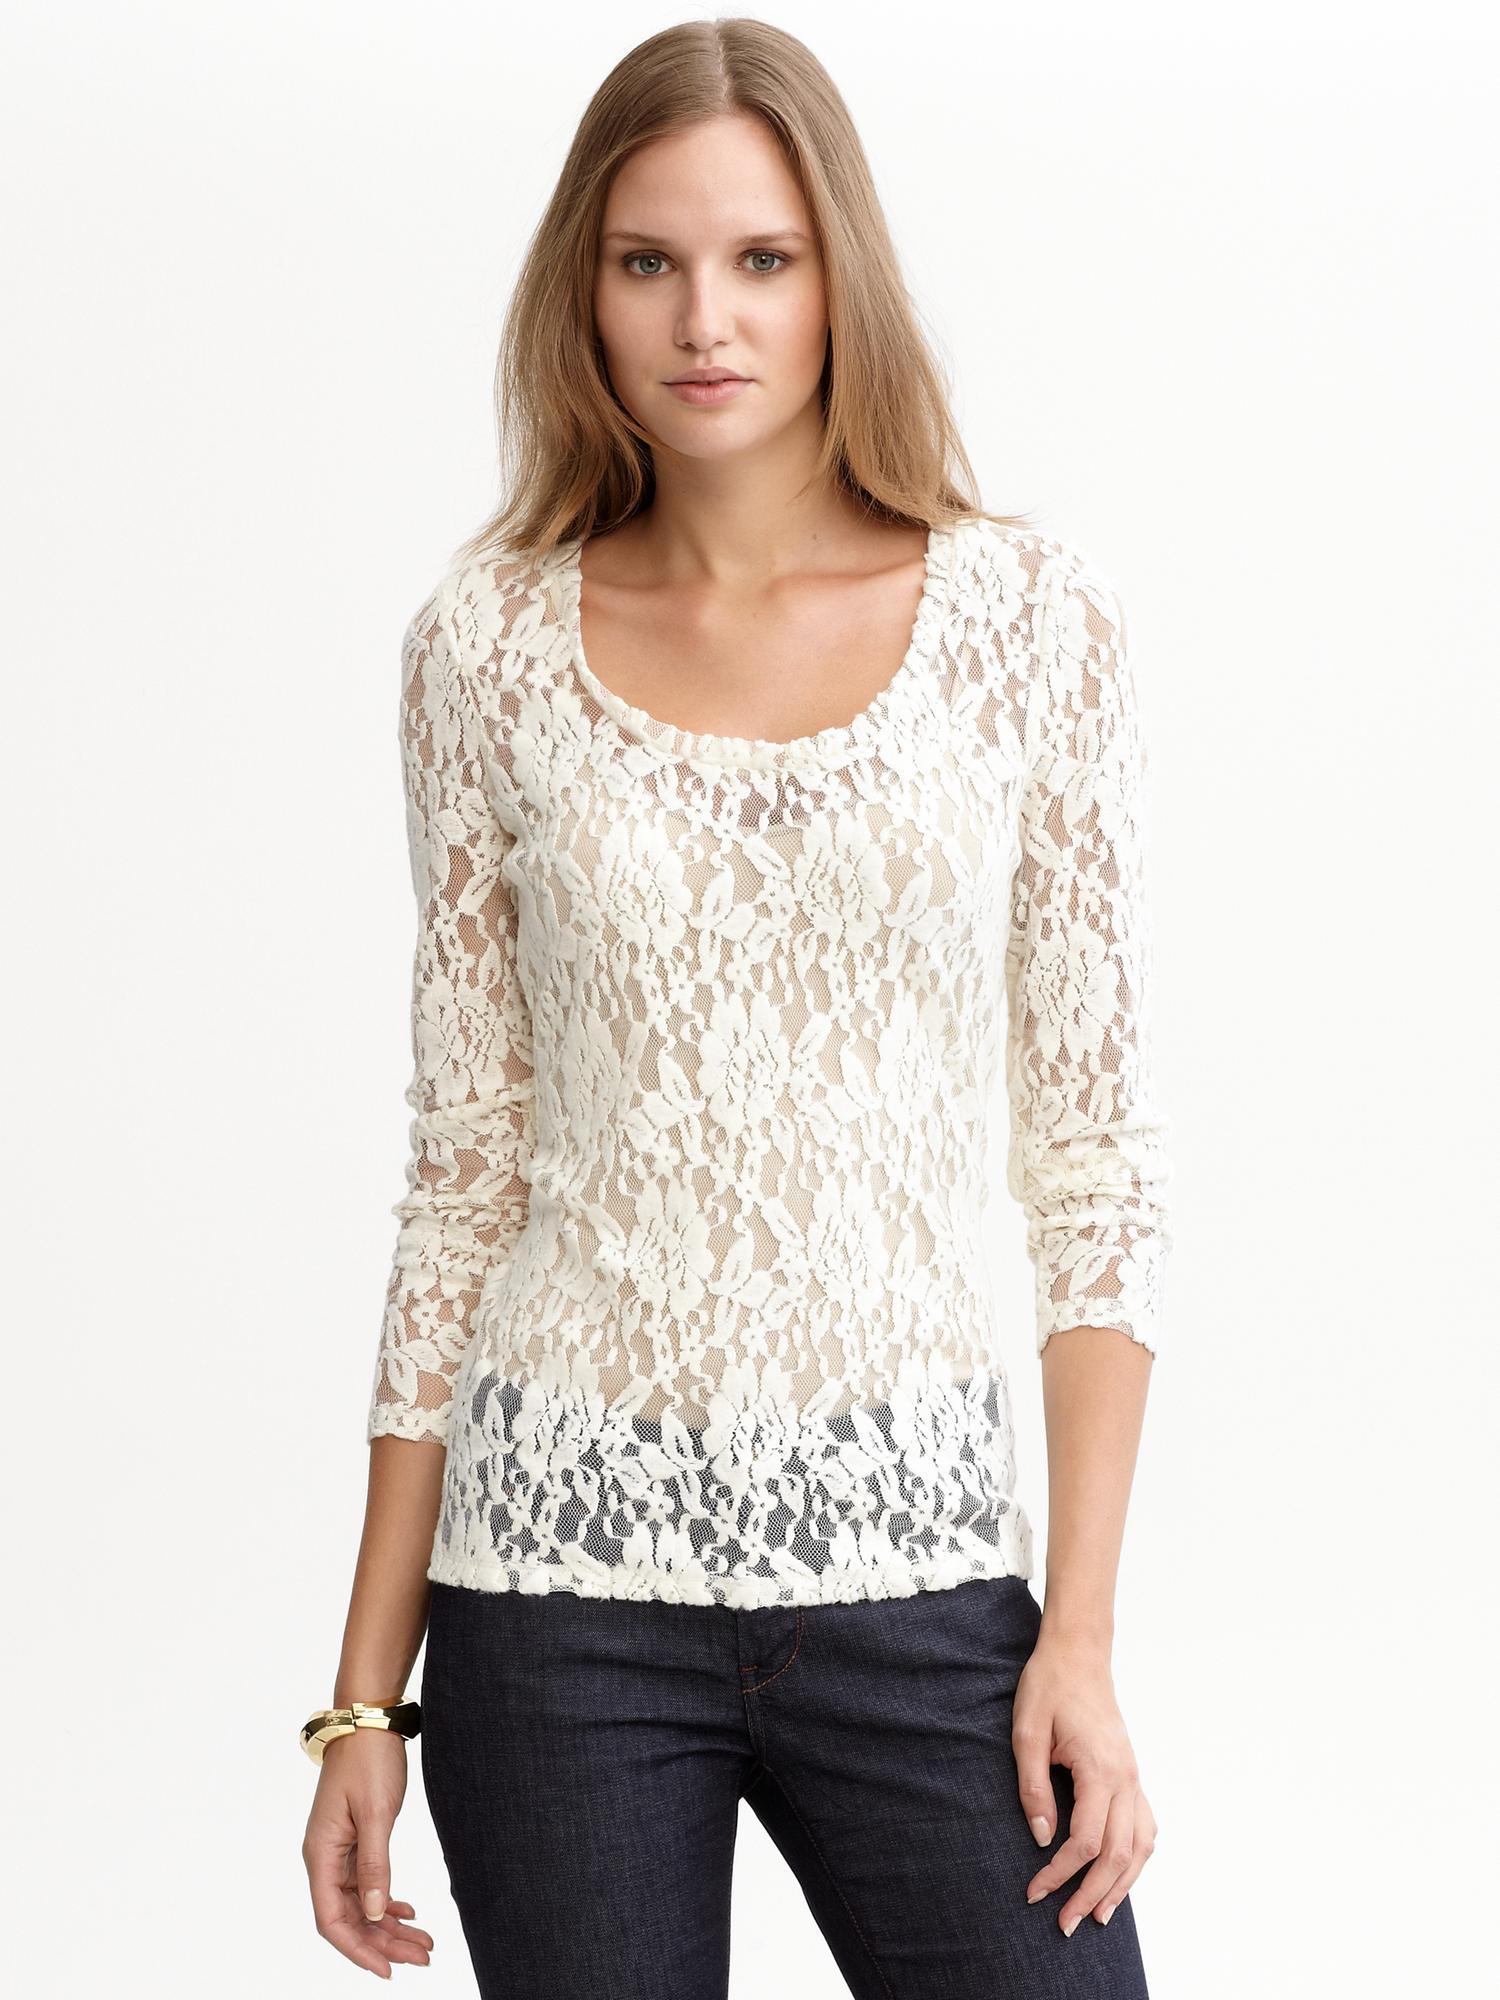 Lace long-sleeved tee